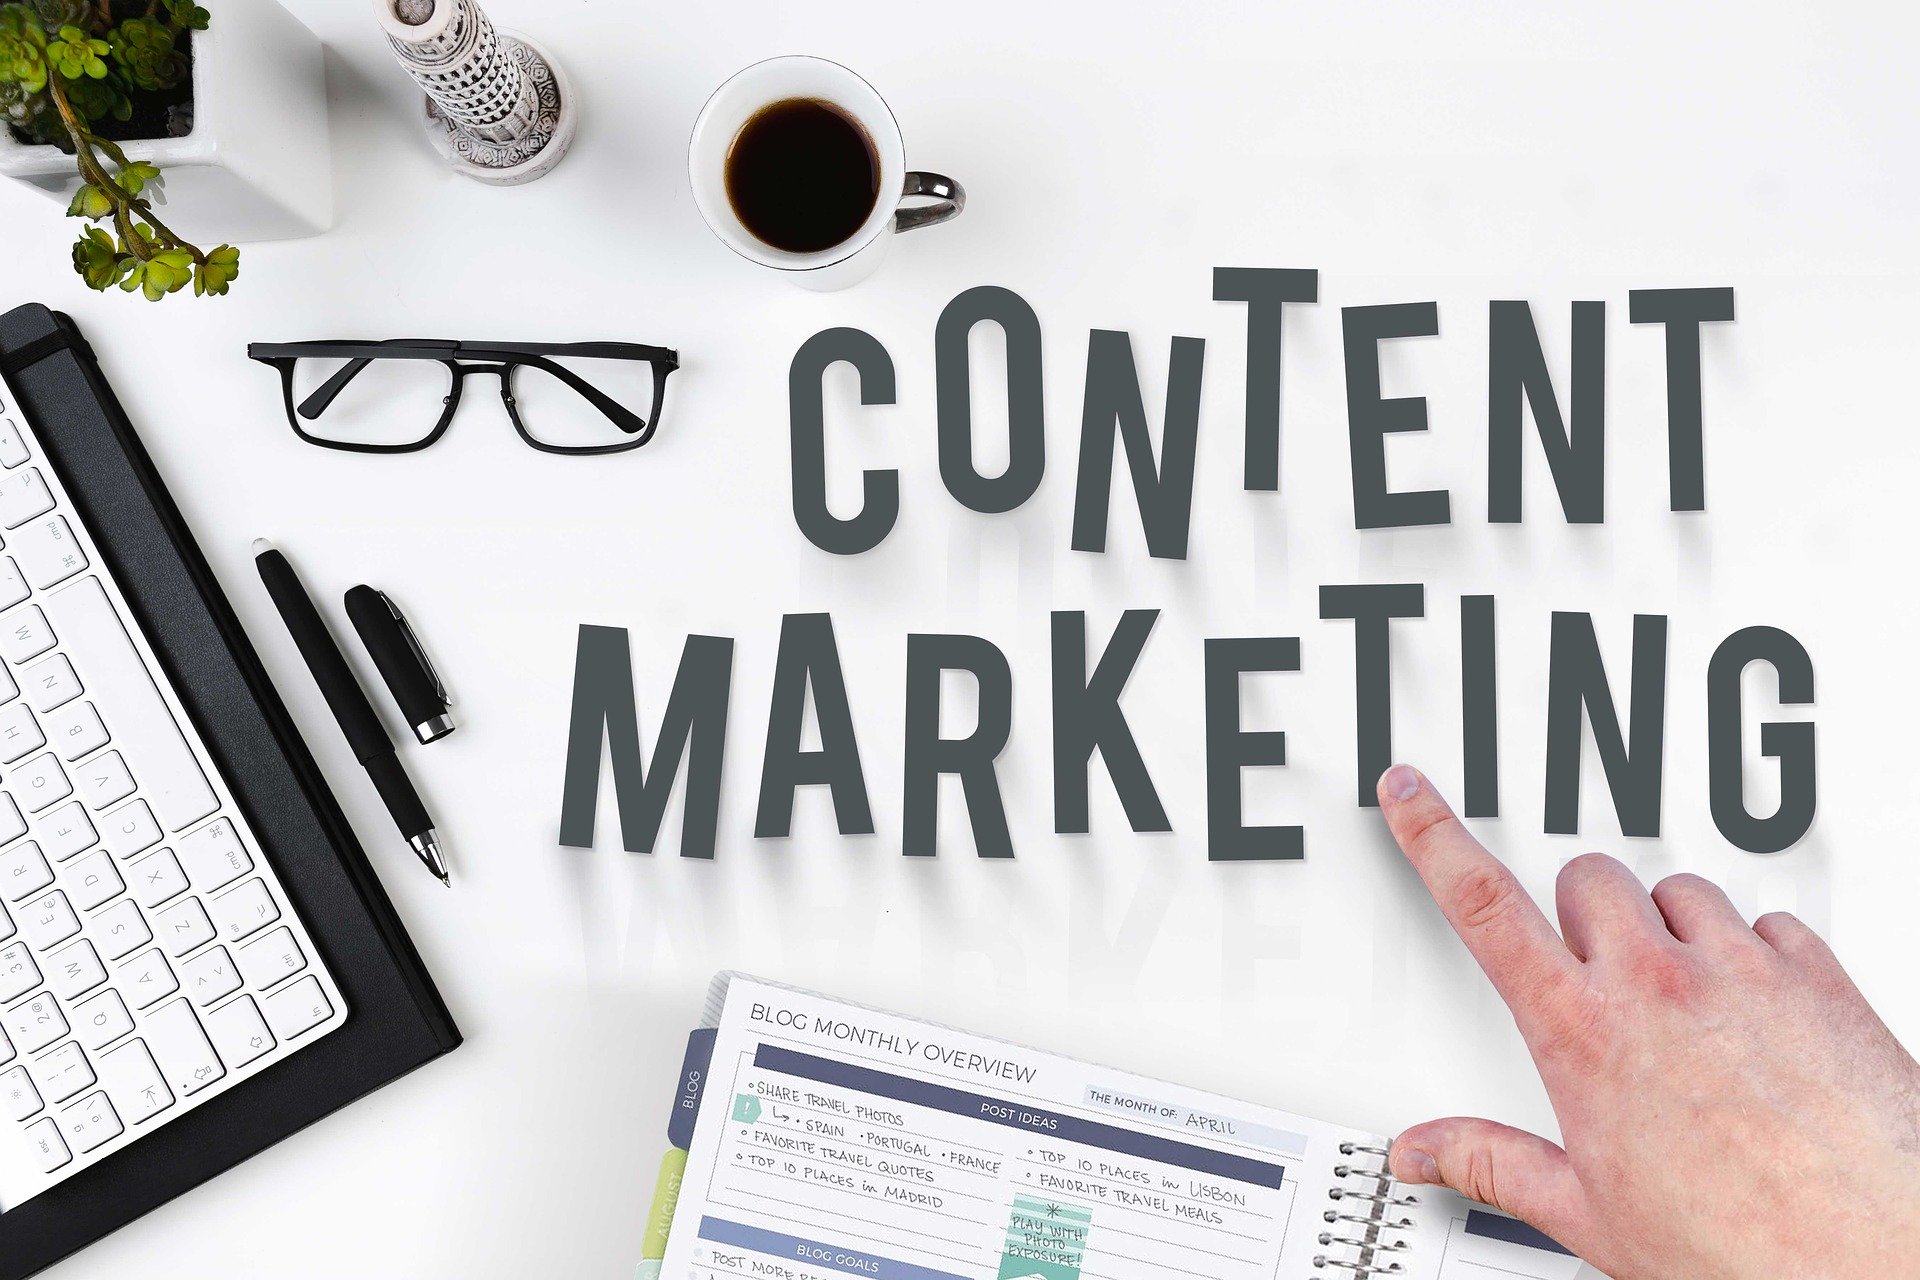 How Content Marketing Benefits Your Business?